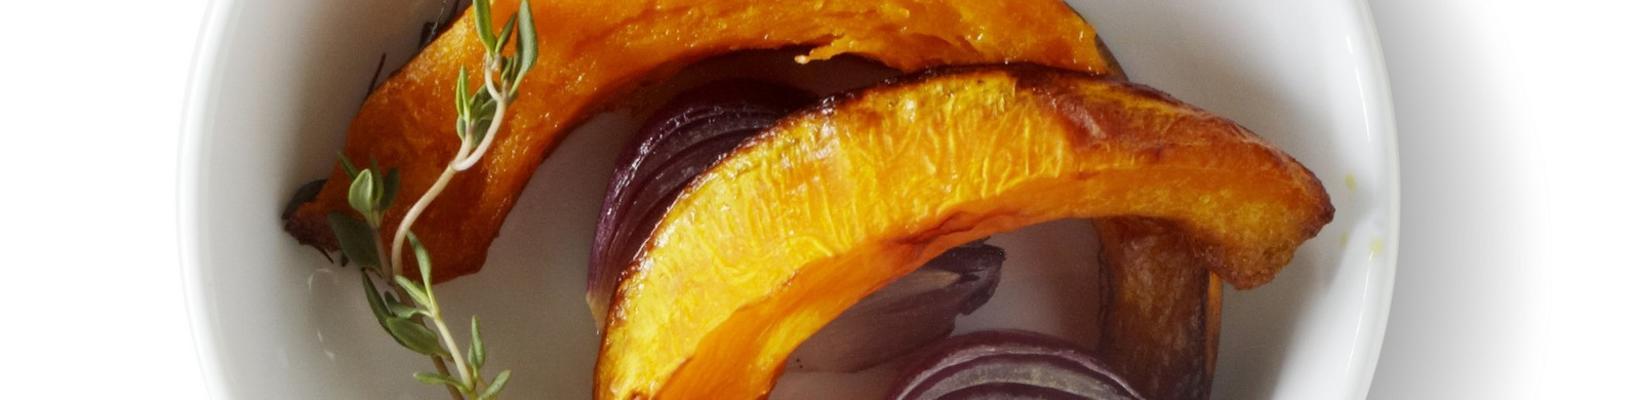 roasted pumpkin with red onion